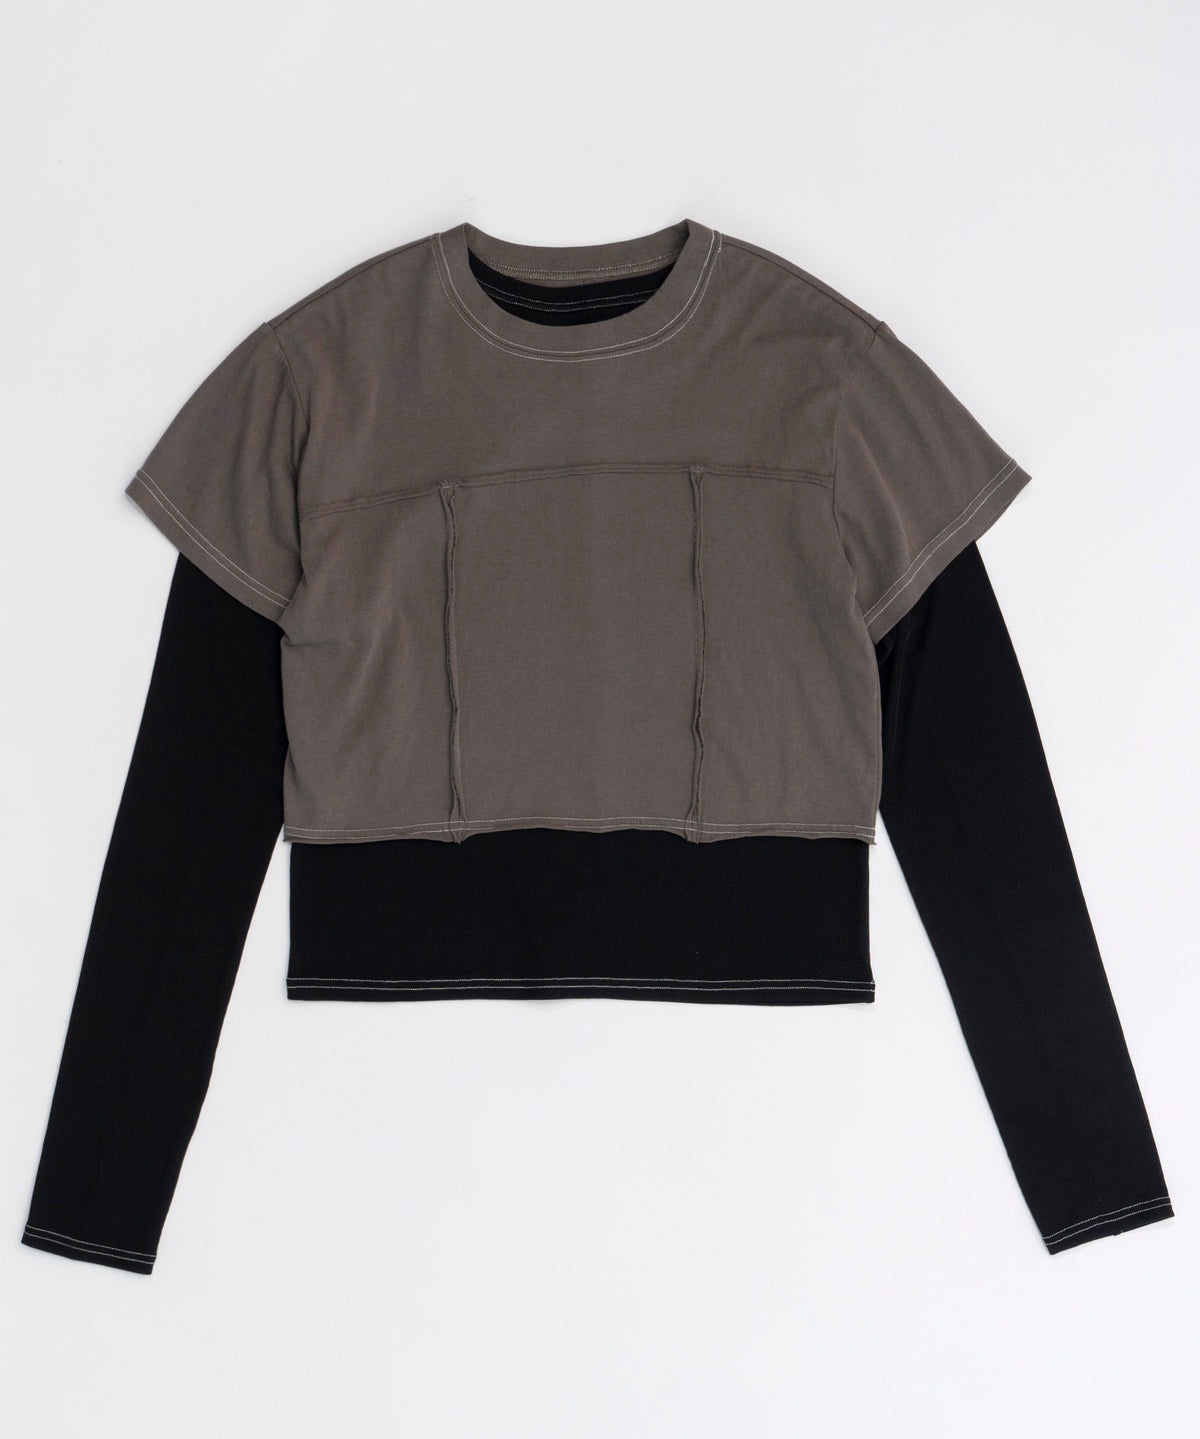 【24AUTUMN PRE-ORDER】Multiway Layered Tops